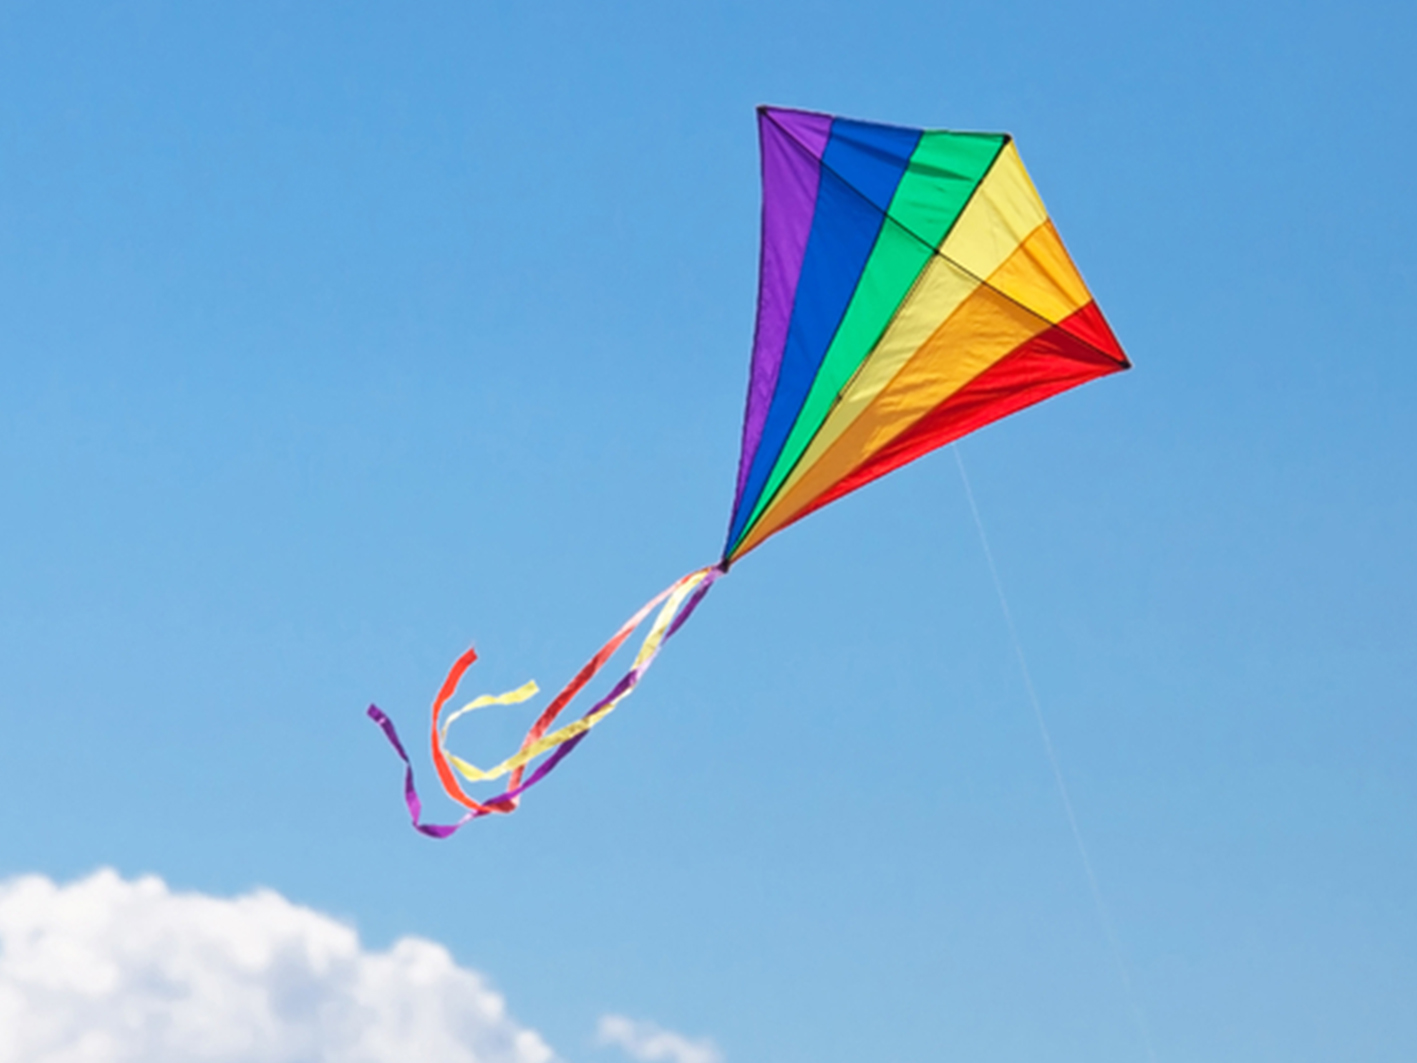 Event: Let’s Go Fly a Kite on April 30th